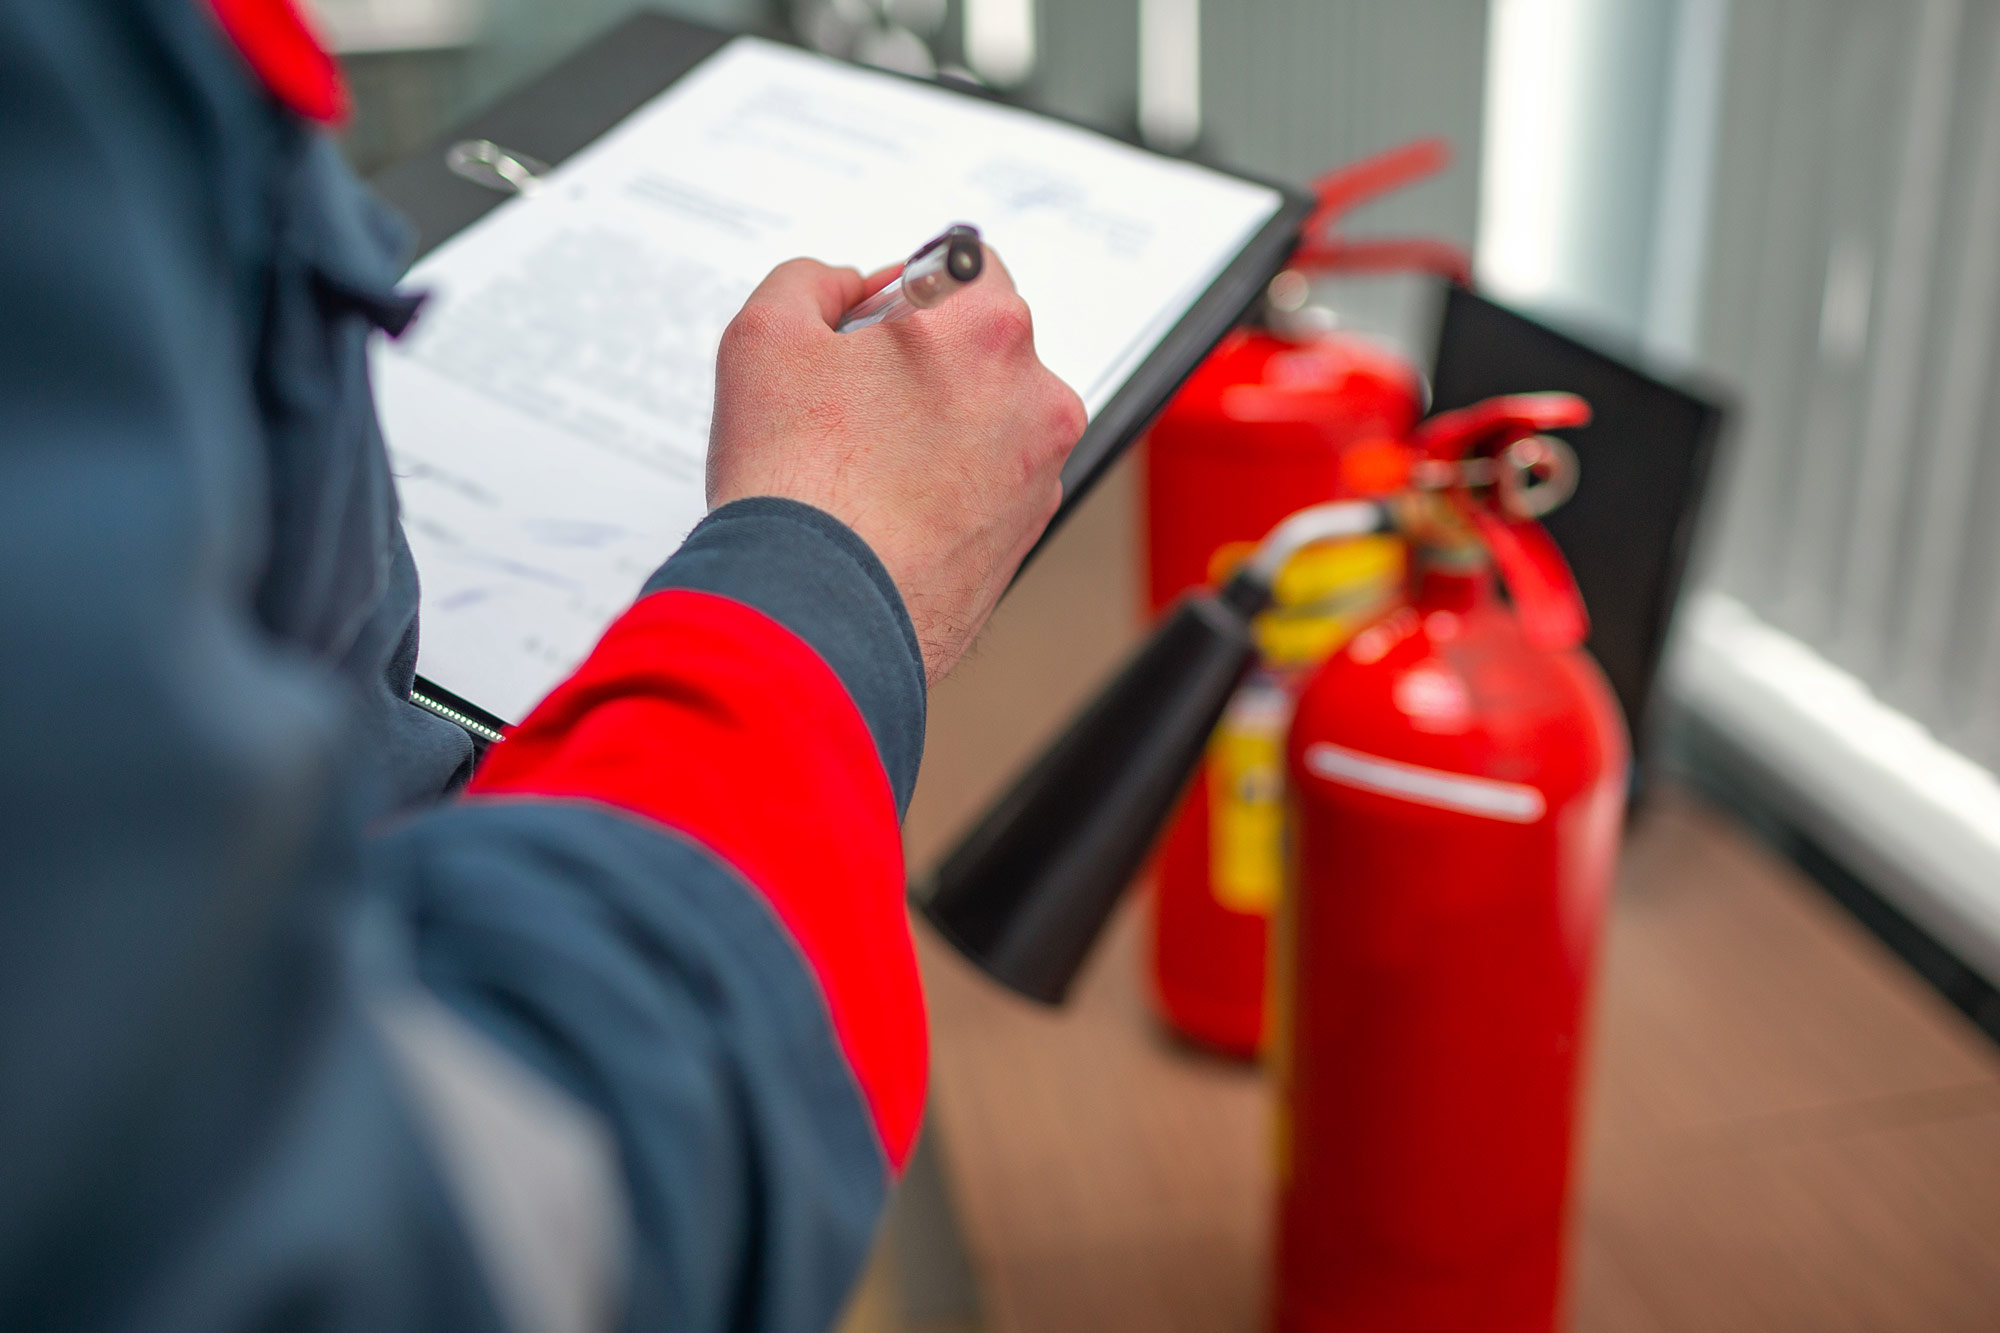 ehs-worker-conducting-fire-safety-audit